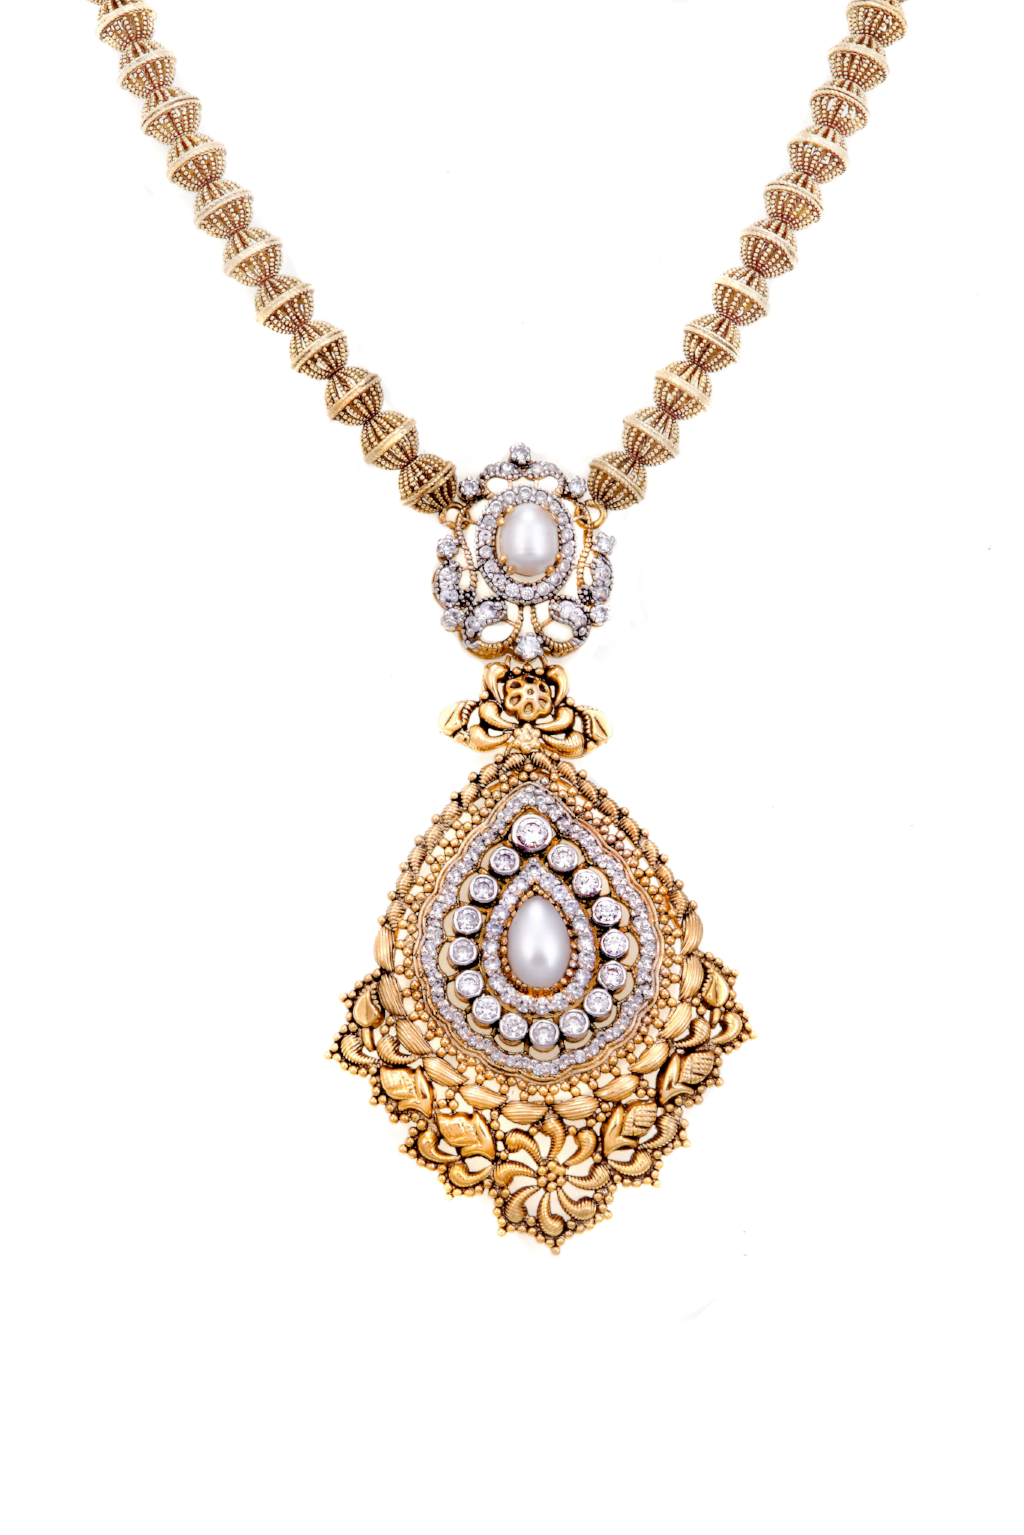 Handcrafted 22k gold necklace set with pearls and cubic zirconia, finished in antique polish.